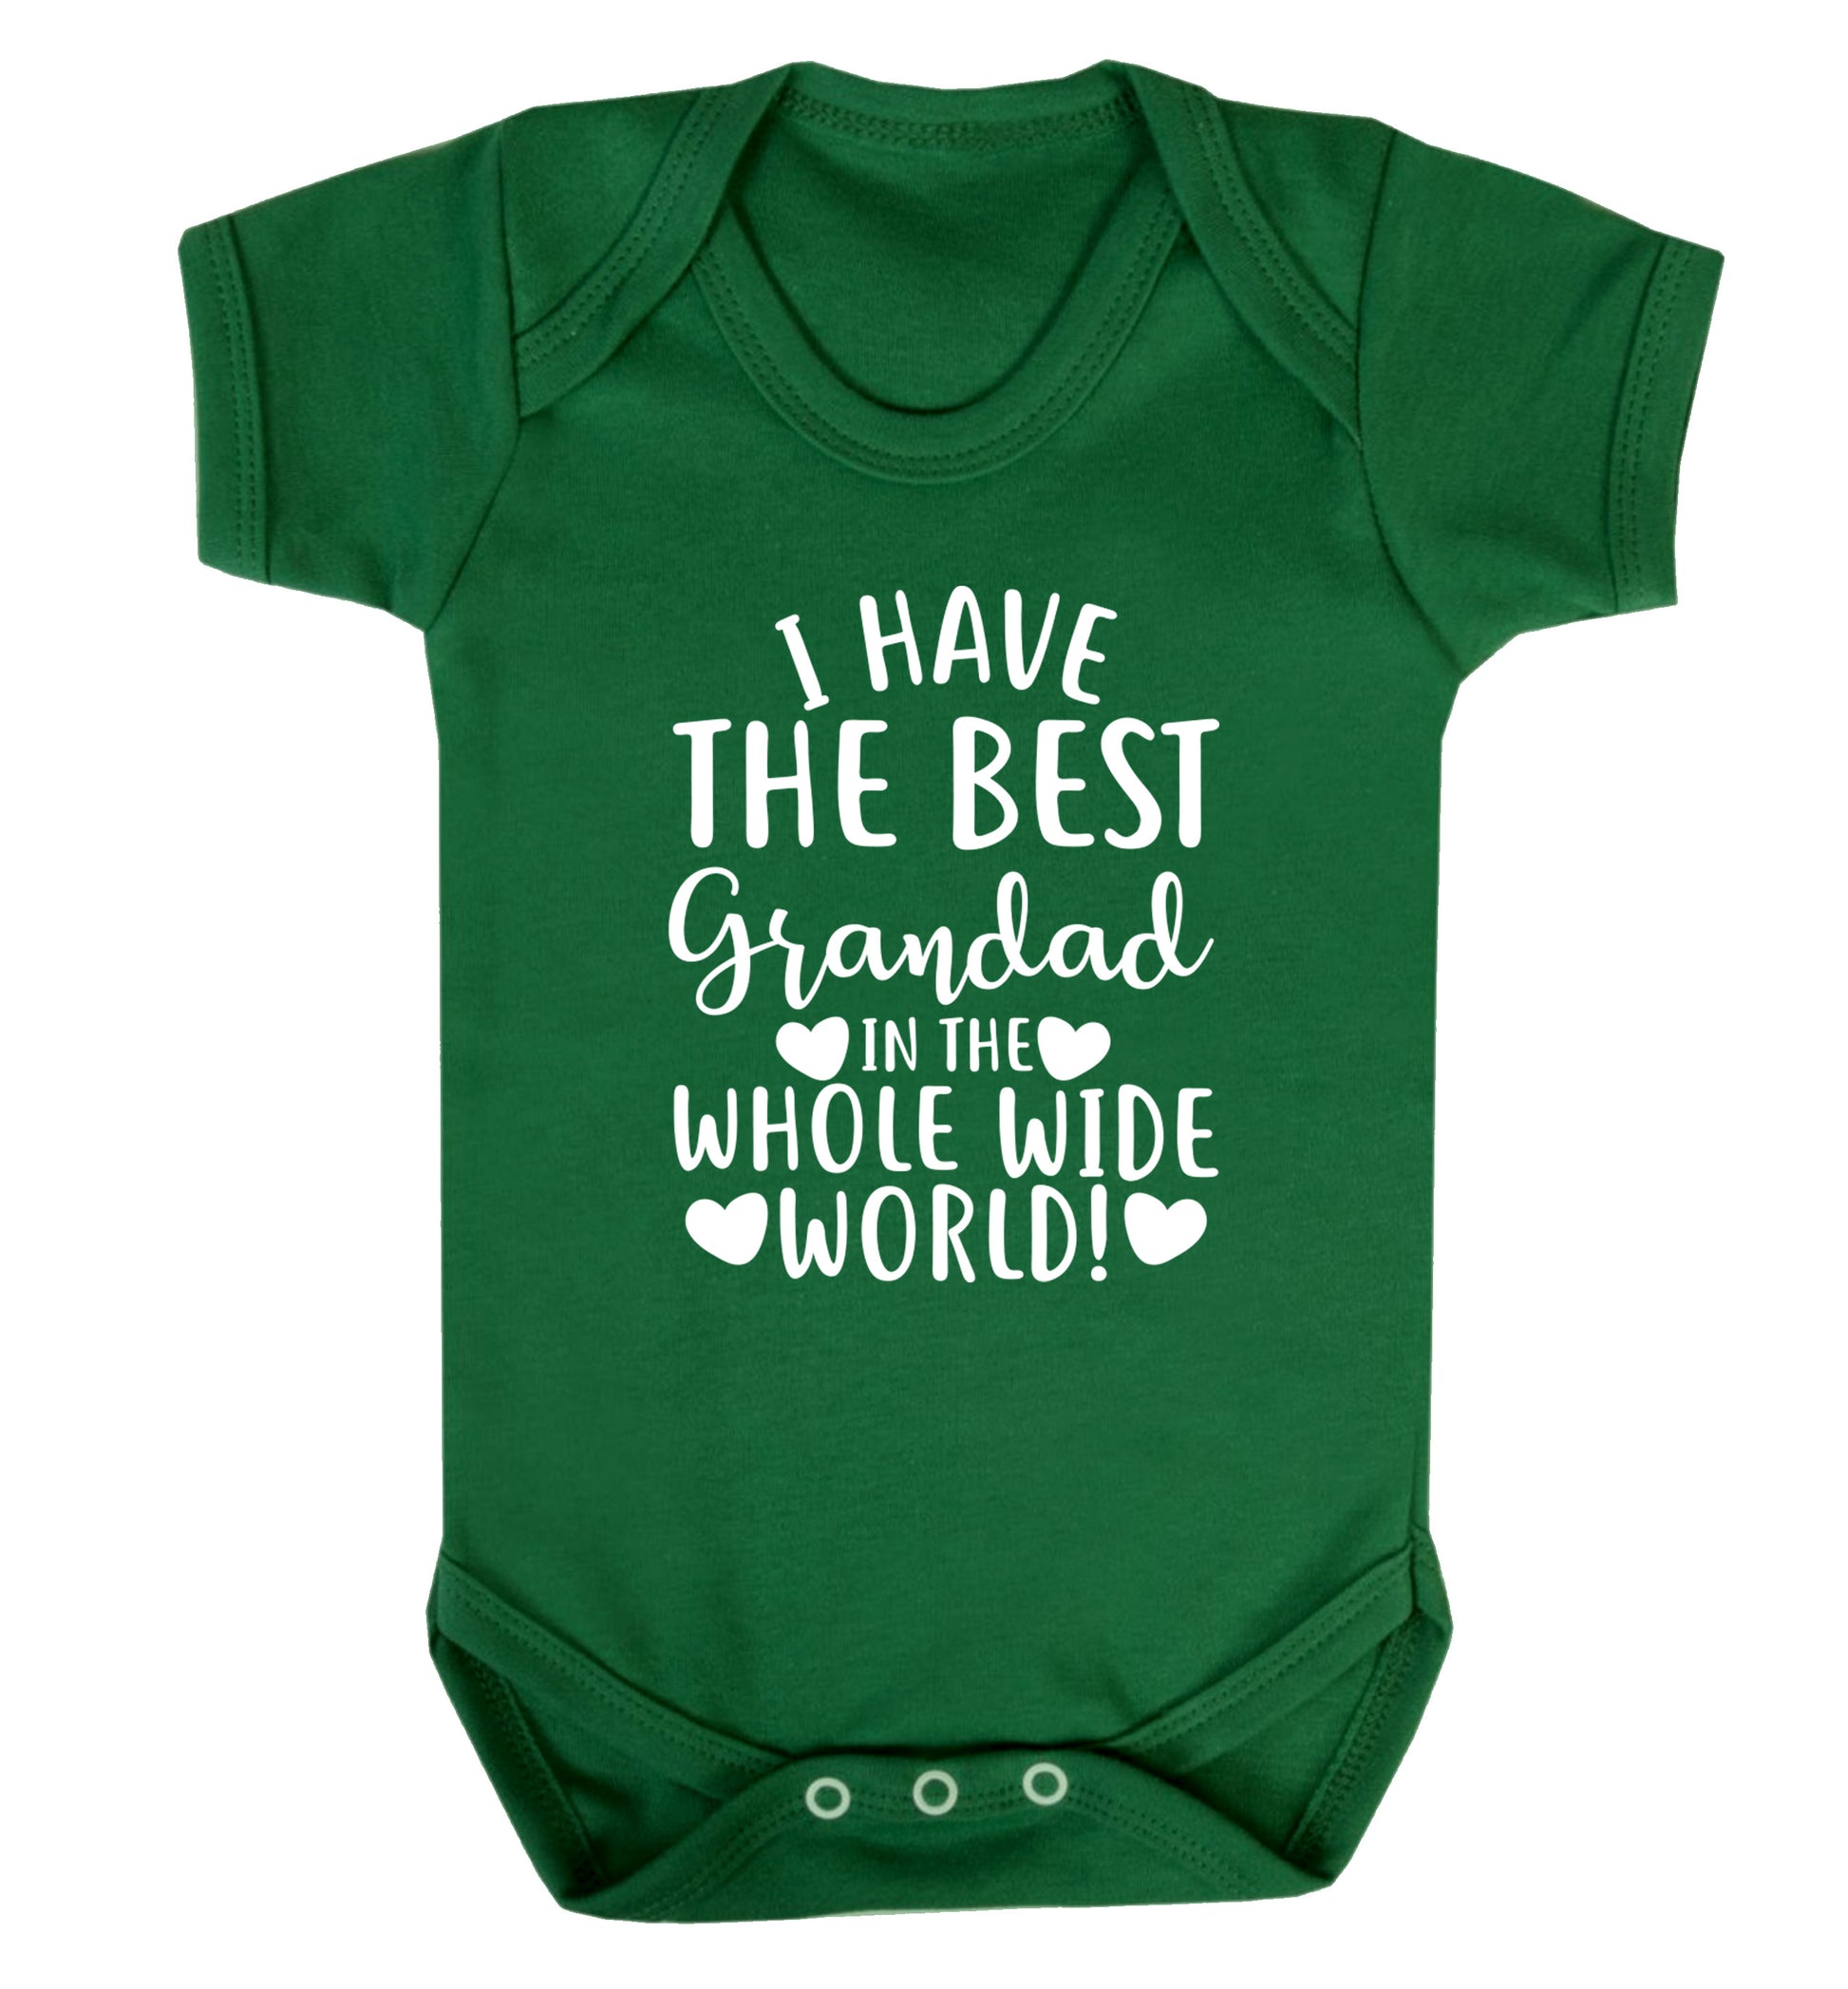 I have the best grandad in the whole wide world! Baby Vest green 18-24 months